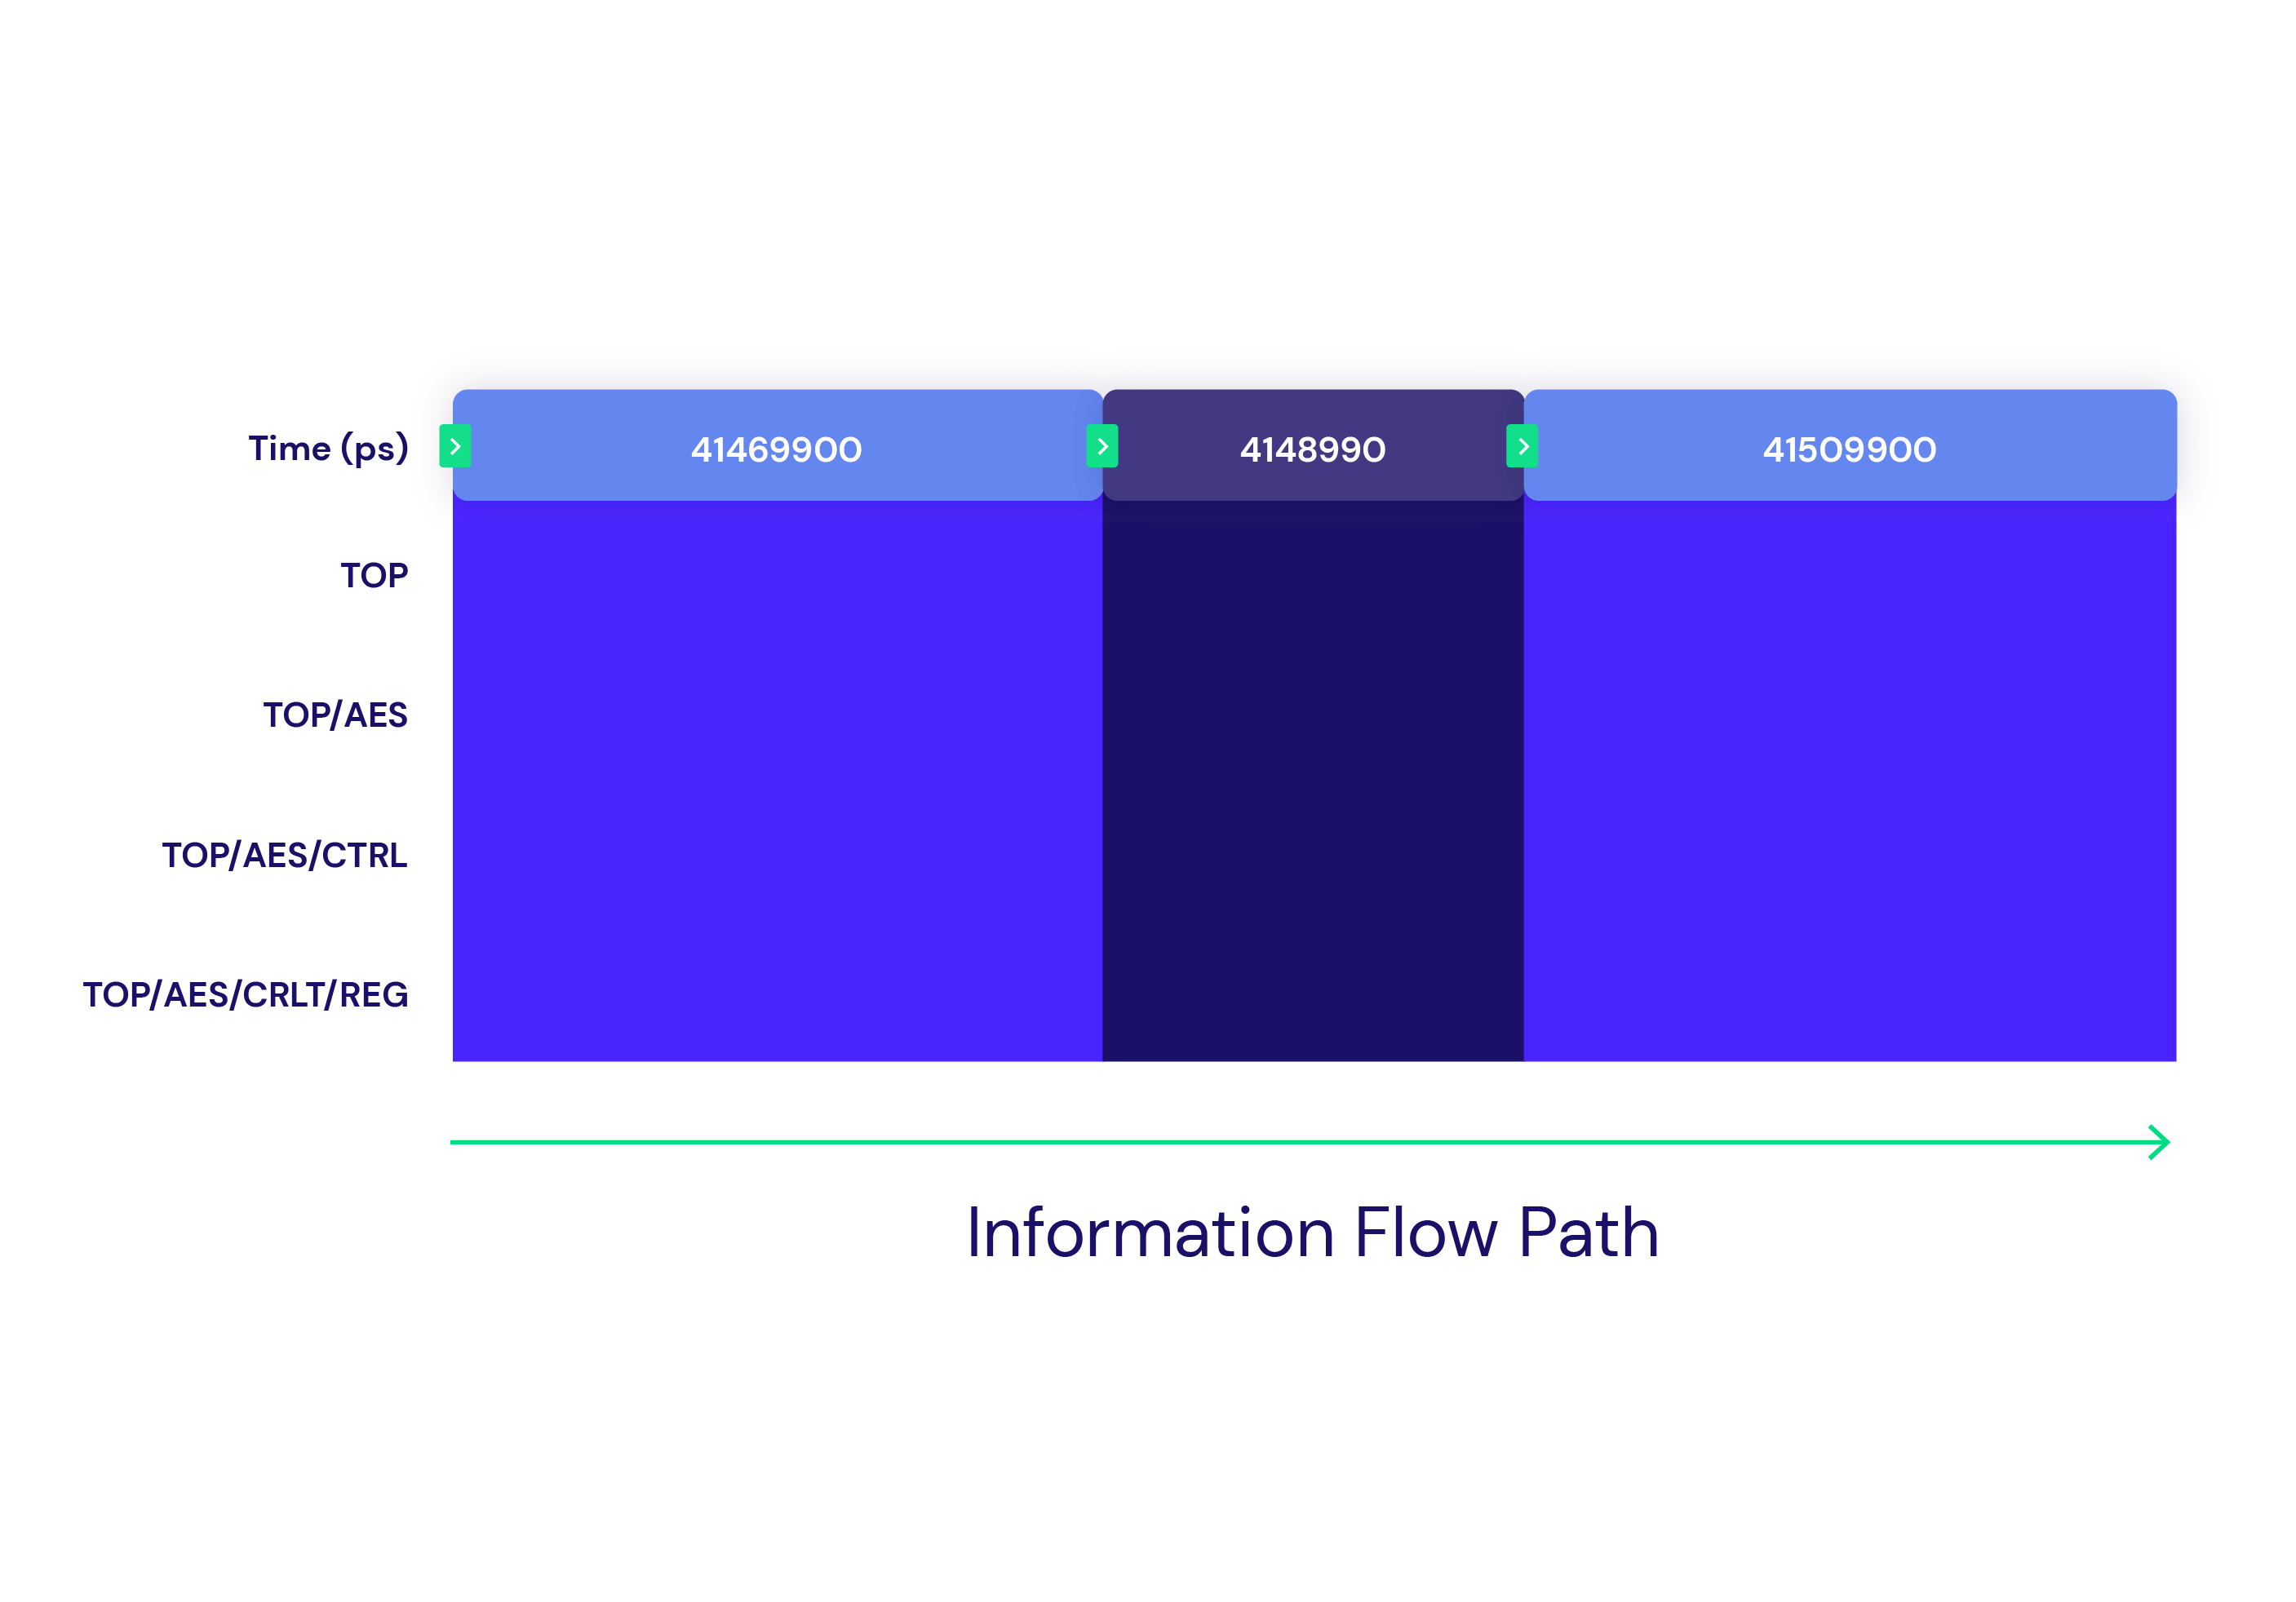 A schematic representation of an information flow path